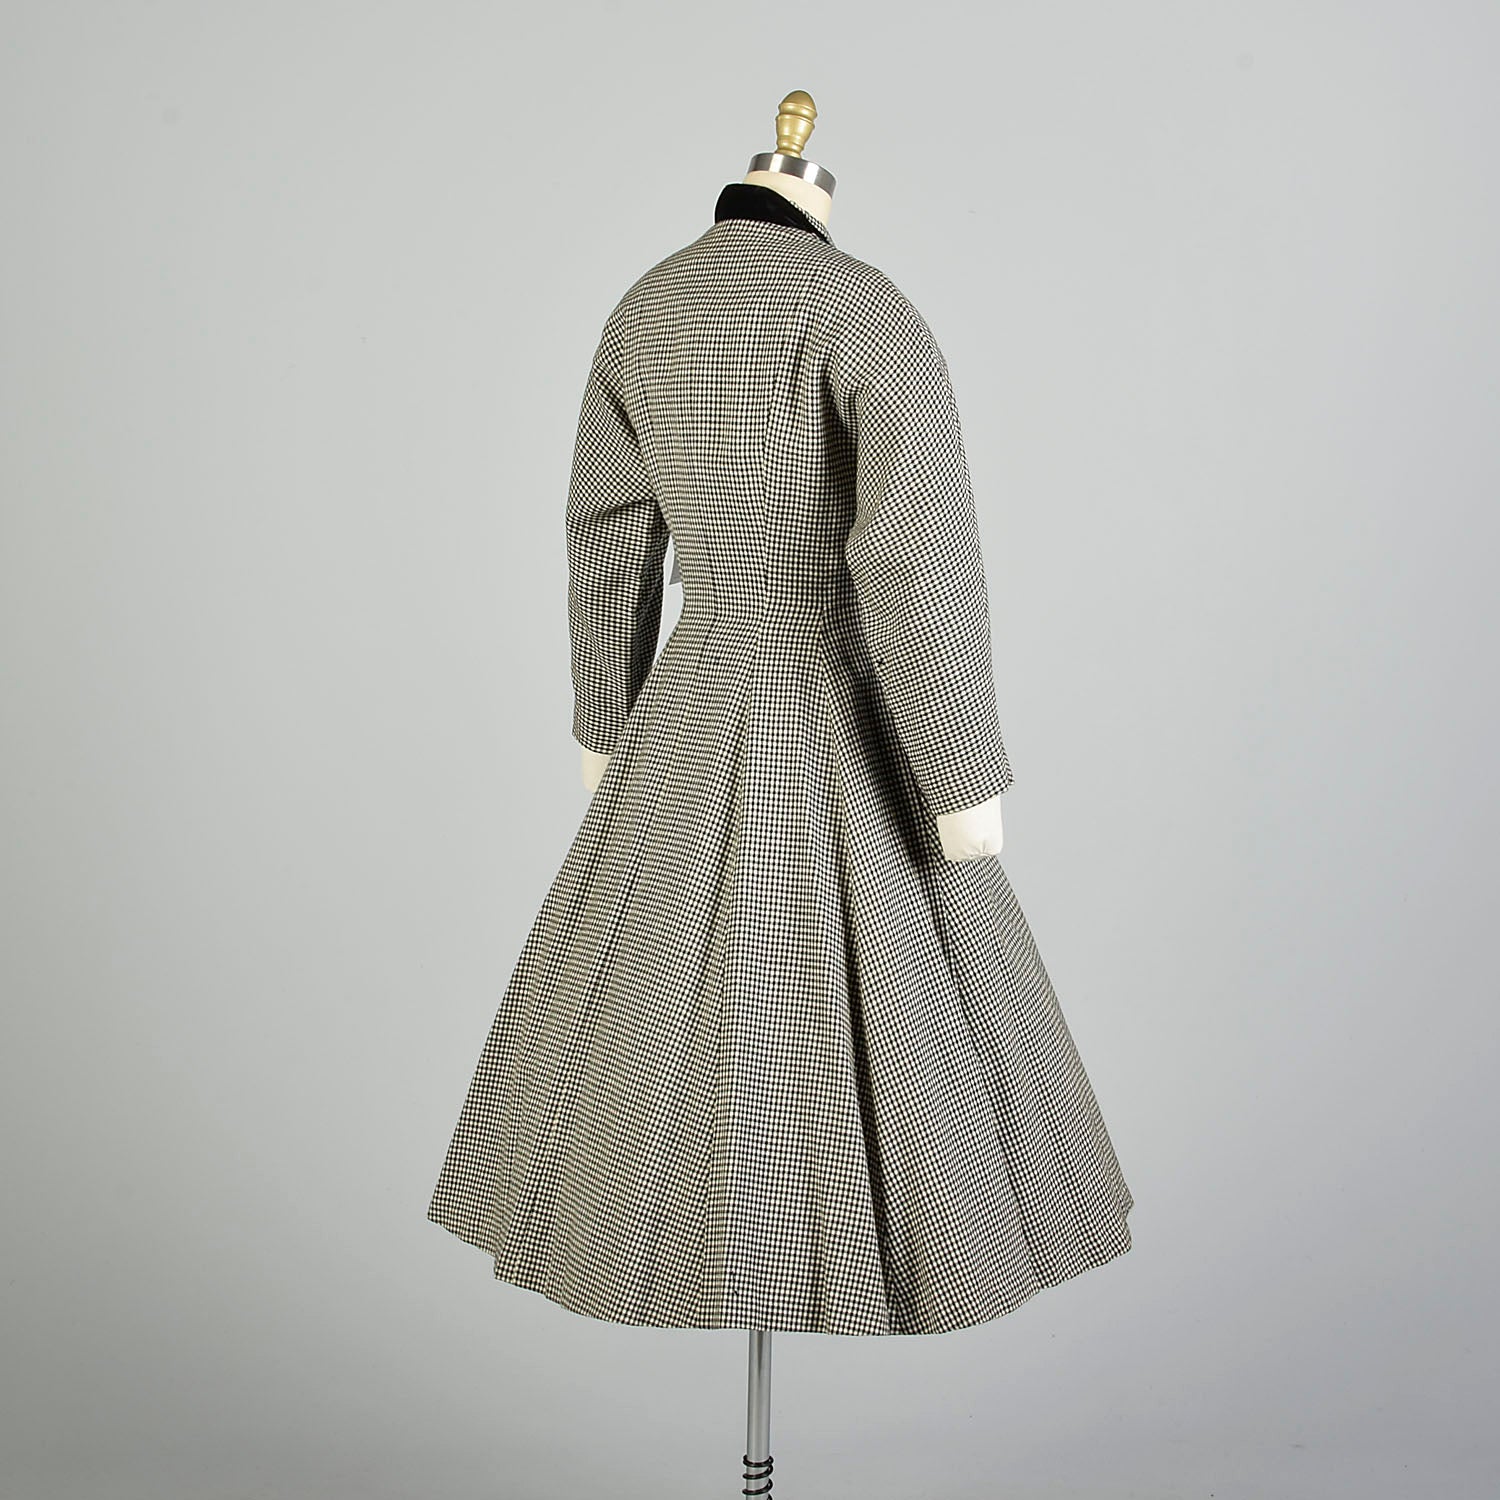 Small 1950s Wool Black White Fit & Flare Houndstooth Winter Coat Dress